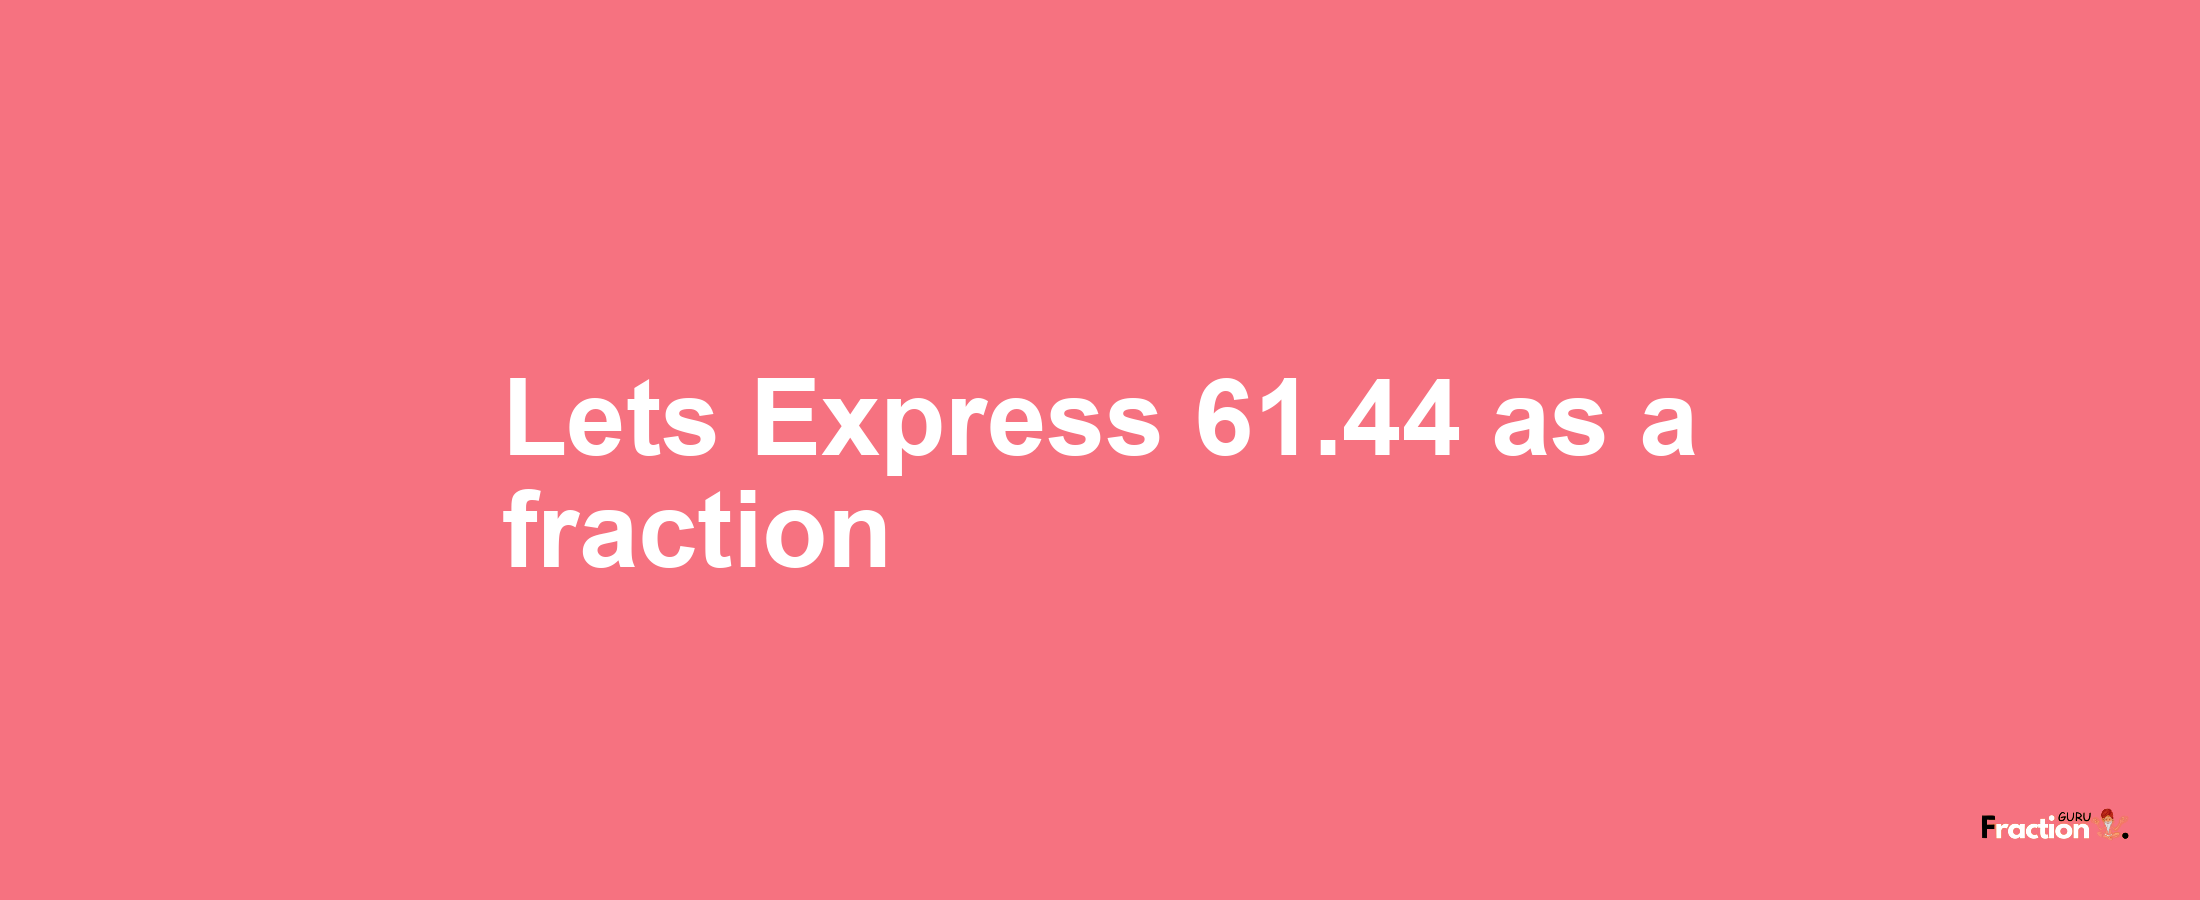 Lets Express 61.44 as afraction